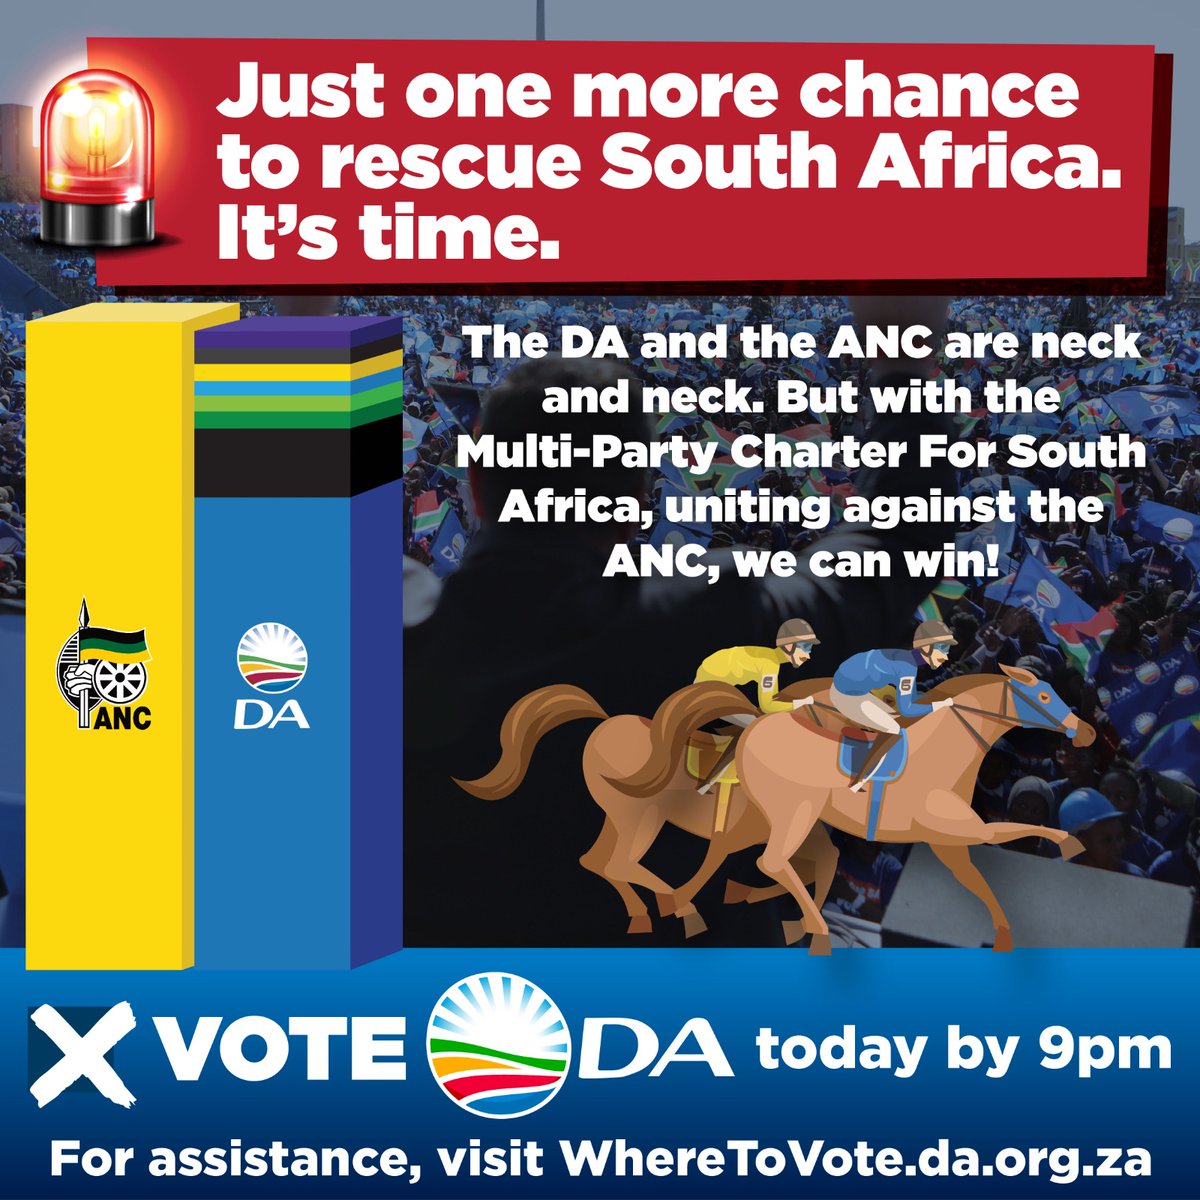 🇿🇦 The race to a prosperous future for all has commenced! We have just one chance to Rescue SA. It's time we elect a new government that prioritises the people, anchored by the DA! A strong DA can #RescueSA. #VoteDA For help, visit WhereToVote.da.org.za or call 021 020 0901.